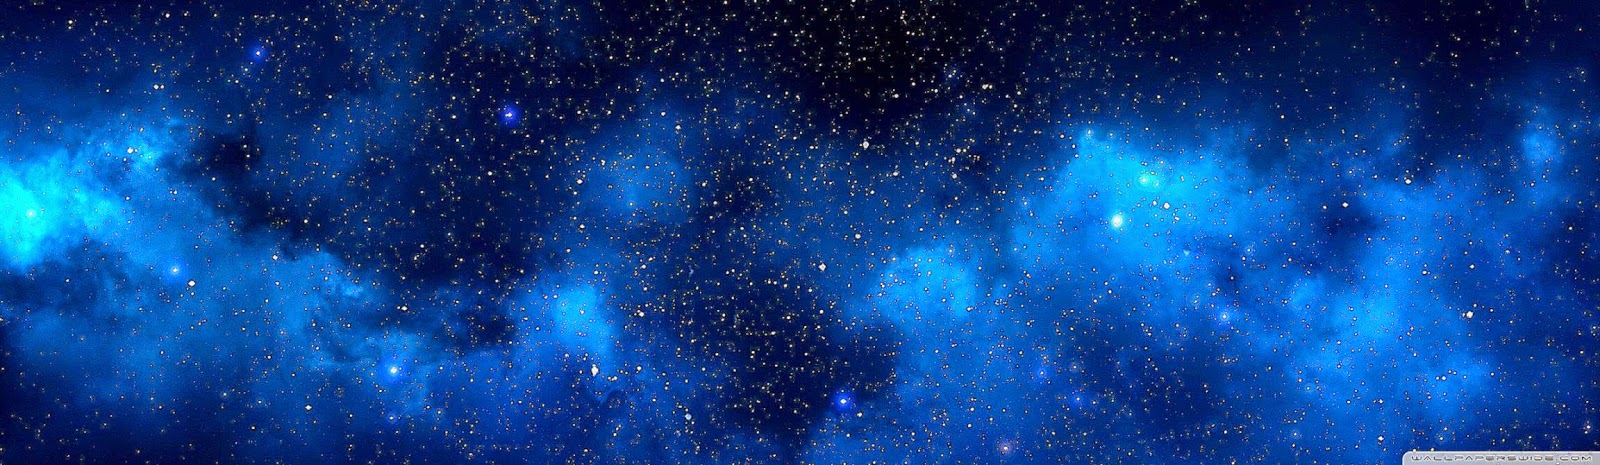 Cool Blue Galaxy Stars Wallpaper Pics About Space